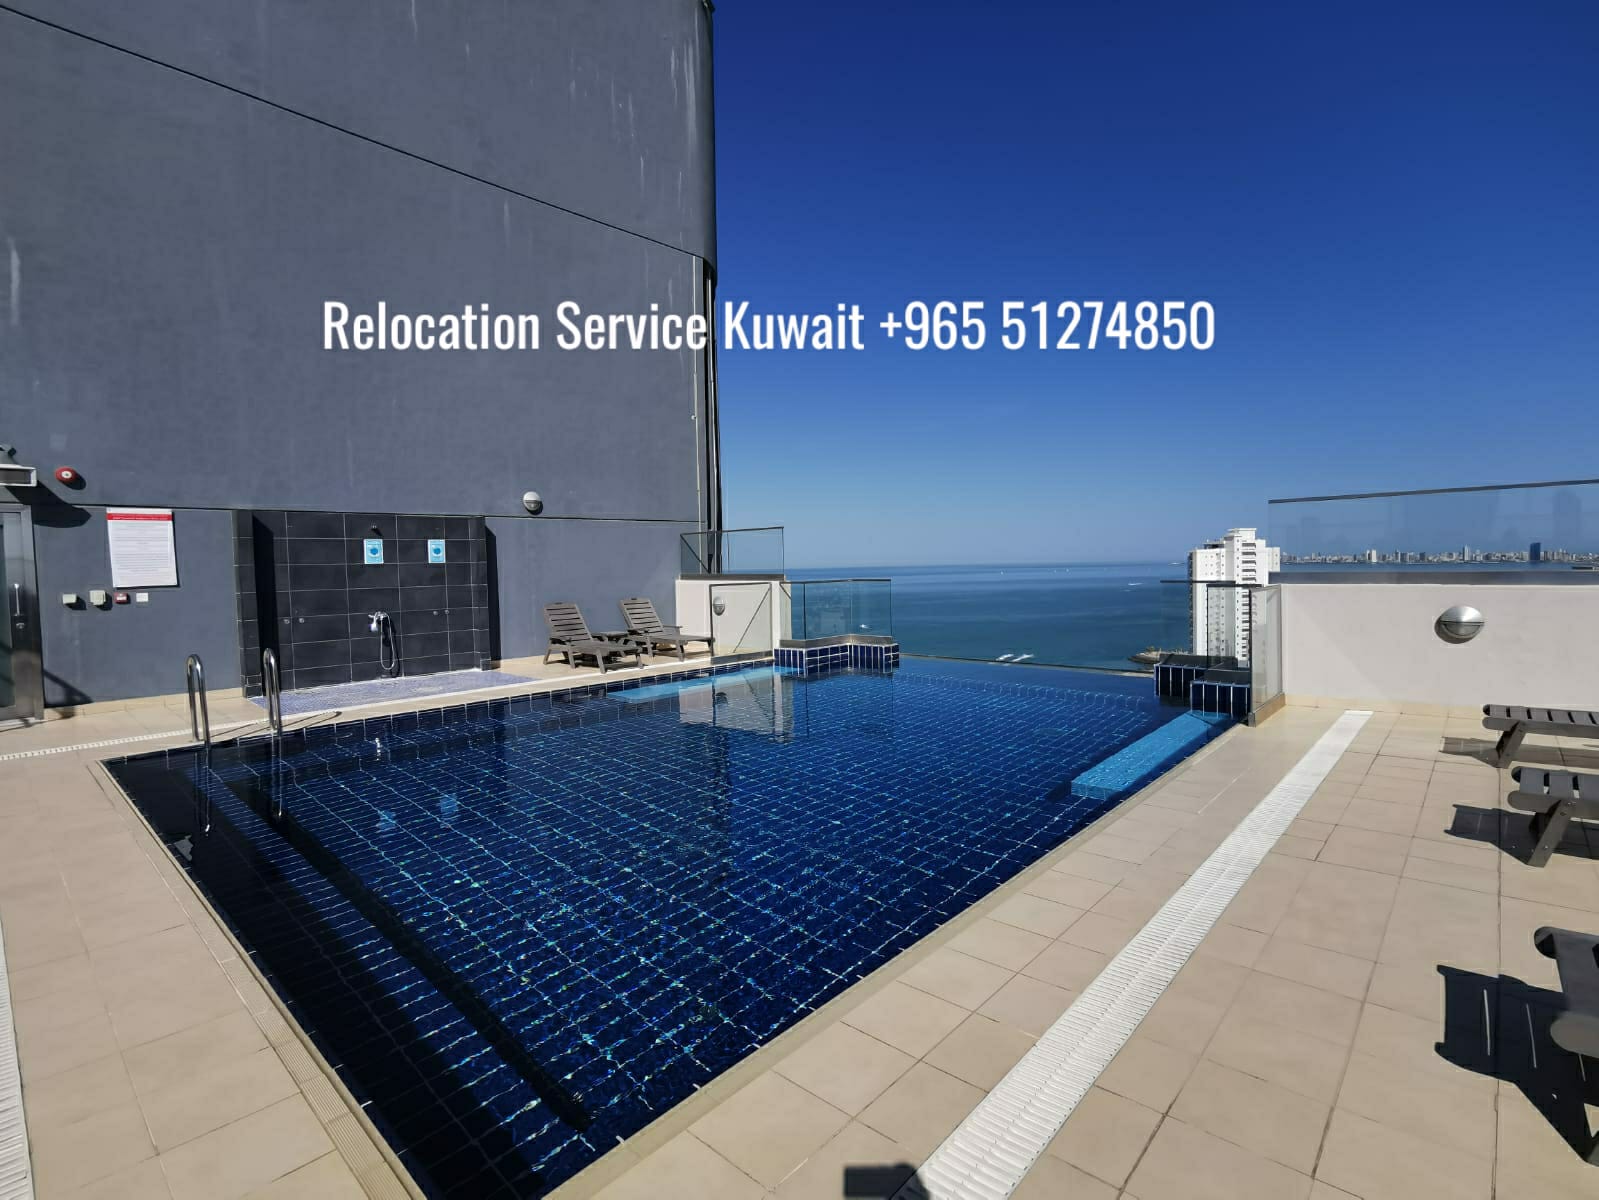 Luxury Sea & City View Apartments 2 bedrooms For Rent in Kuwait